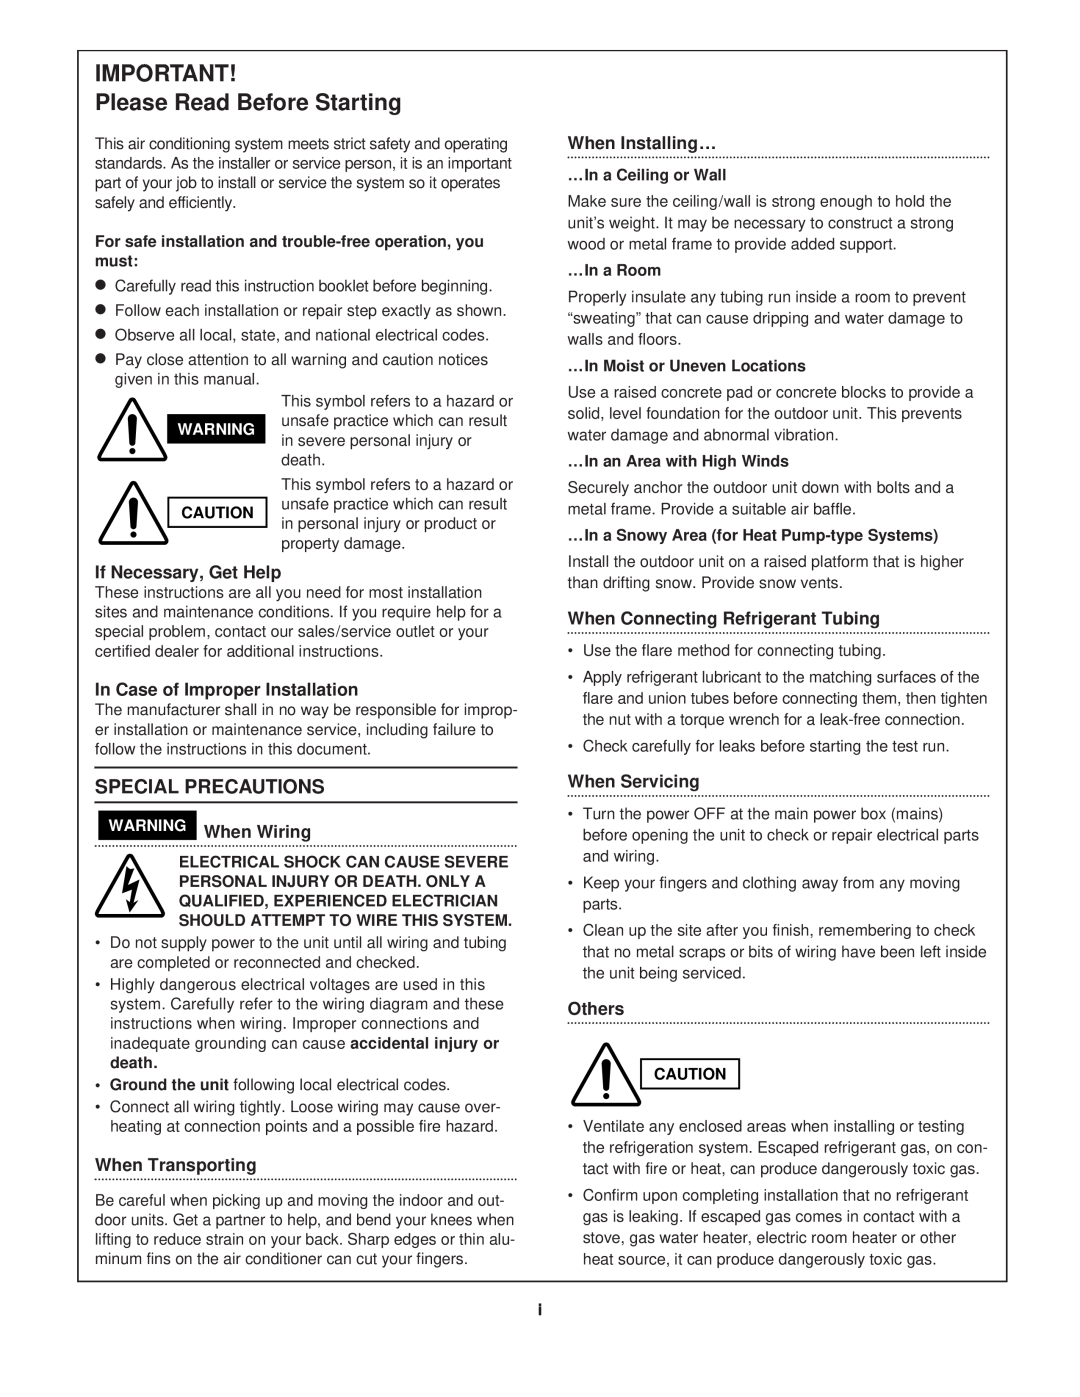 Sanyo CG1411, KGS1411 service manual Please Read Before Starting, Special Precautions 